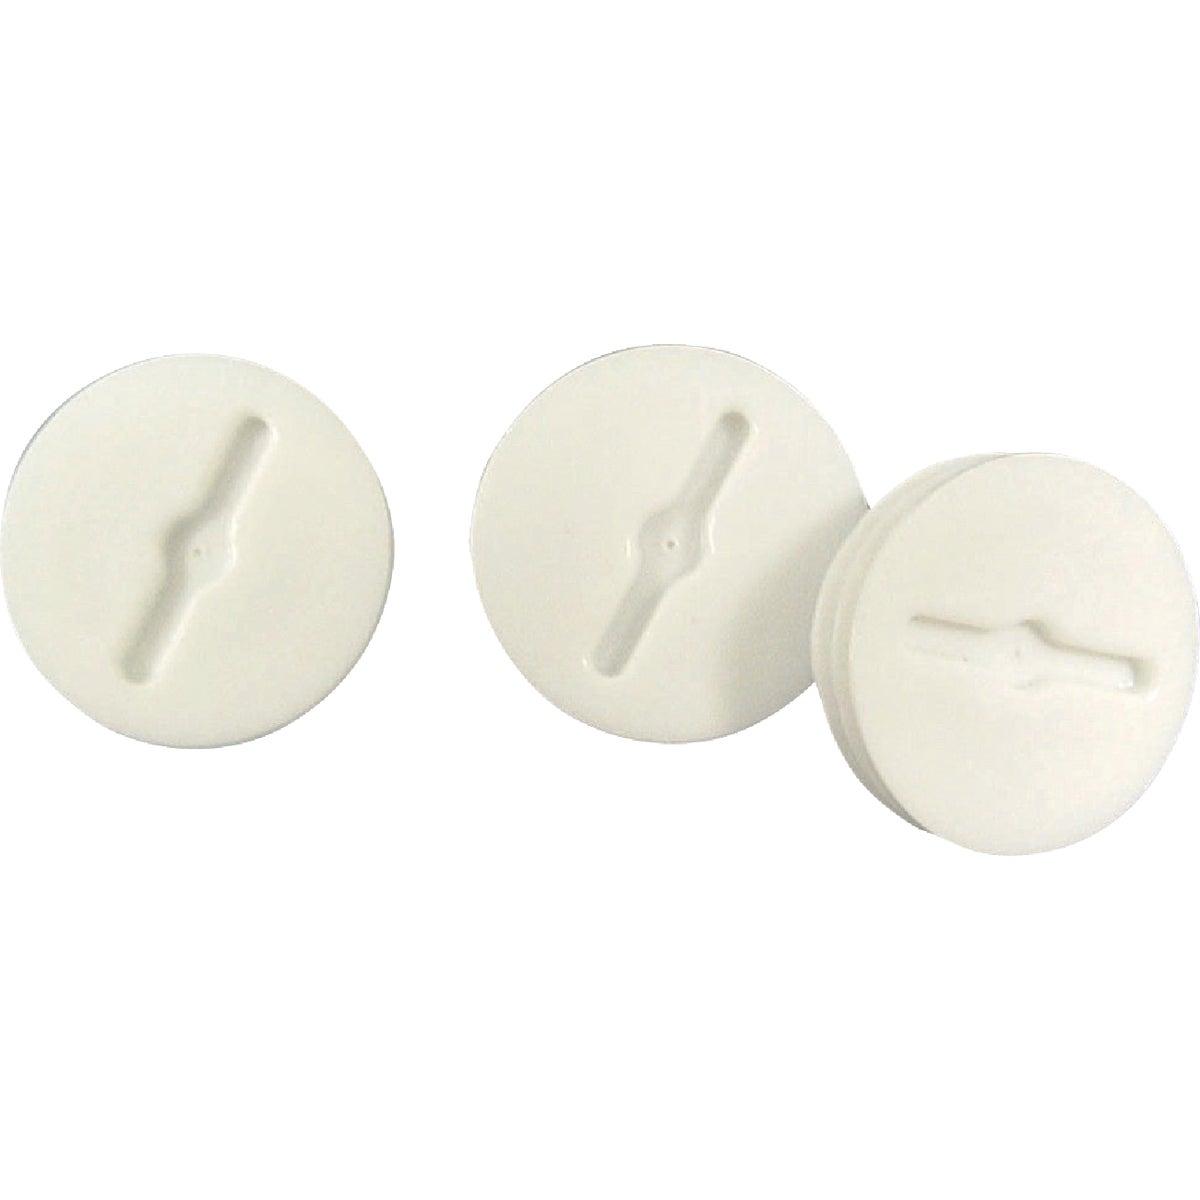 Bell 1/2 In. White Closure Plug (3-Pack)